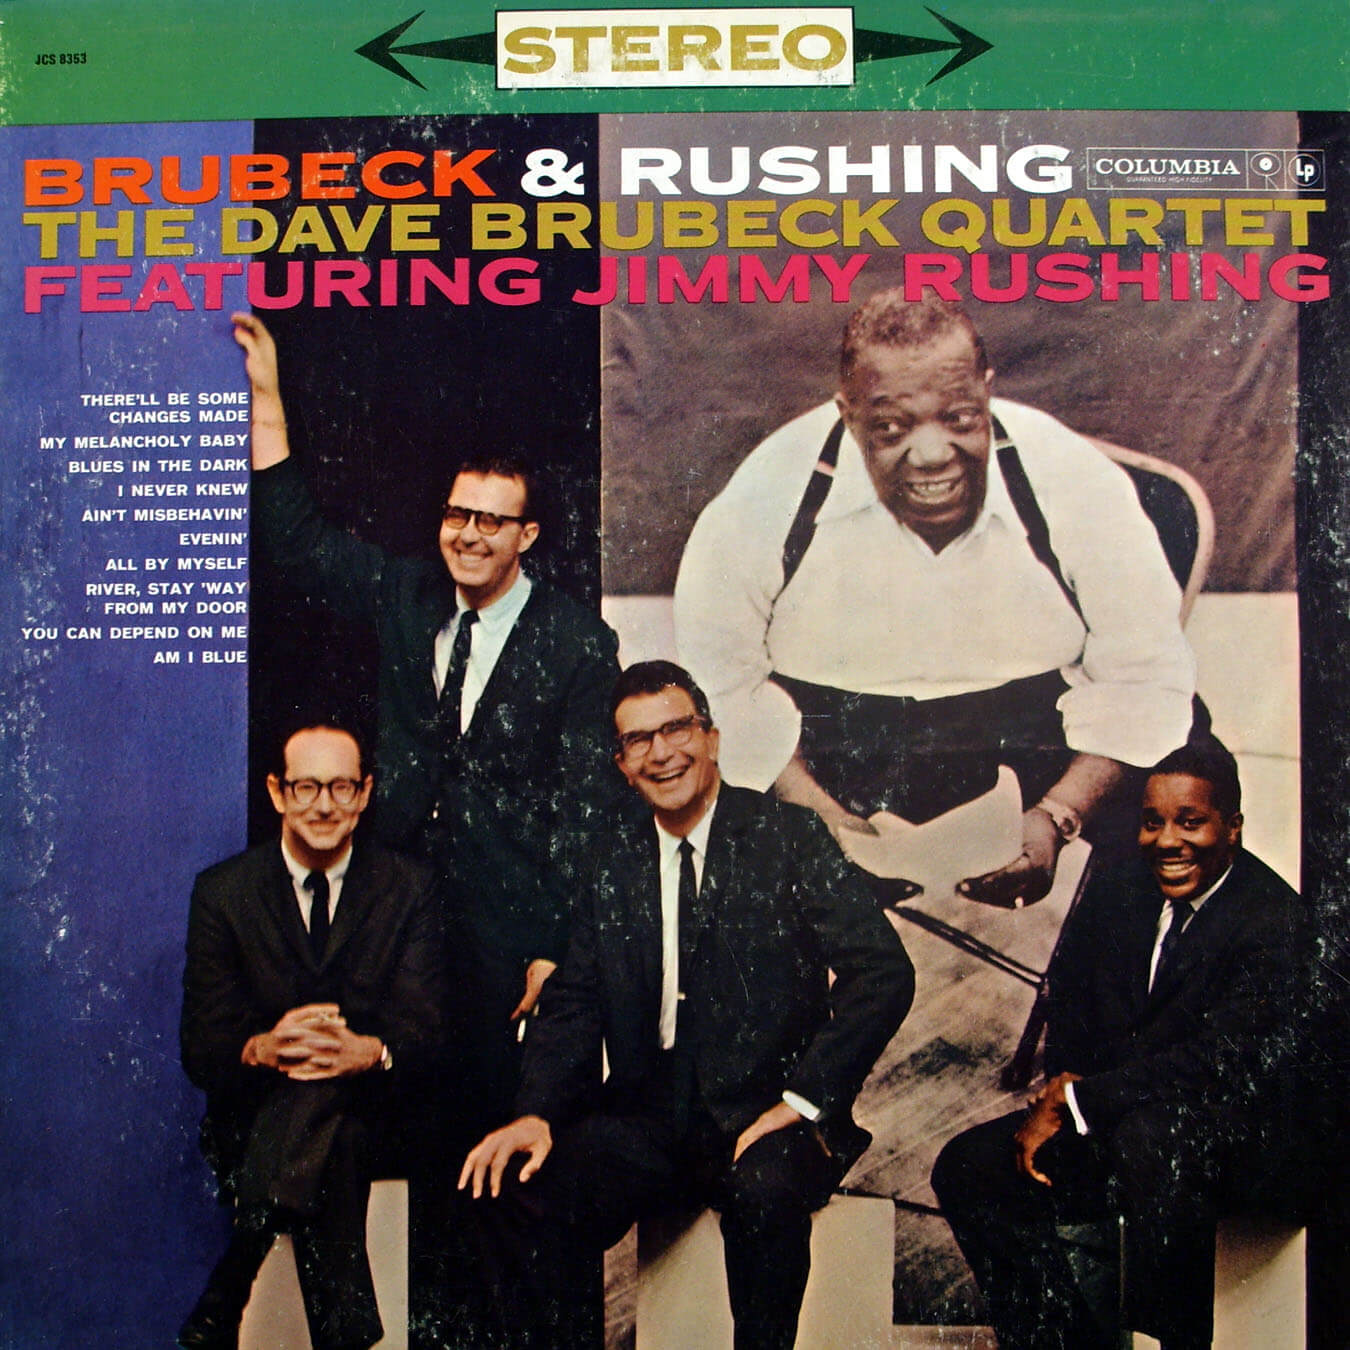 the-dave-brubeck-quartet-featuring-jimmy-rushing-brubeck-rushing-front1